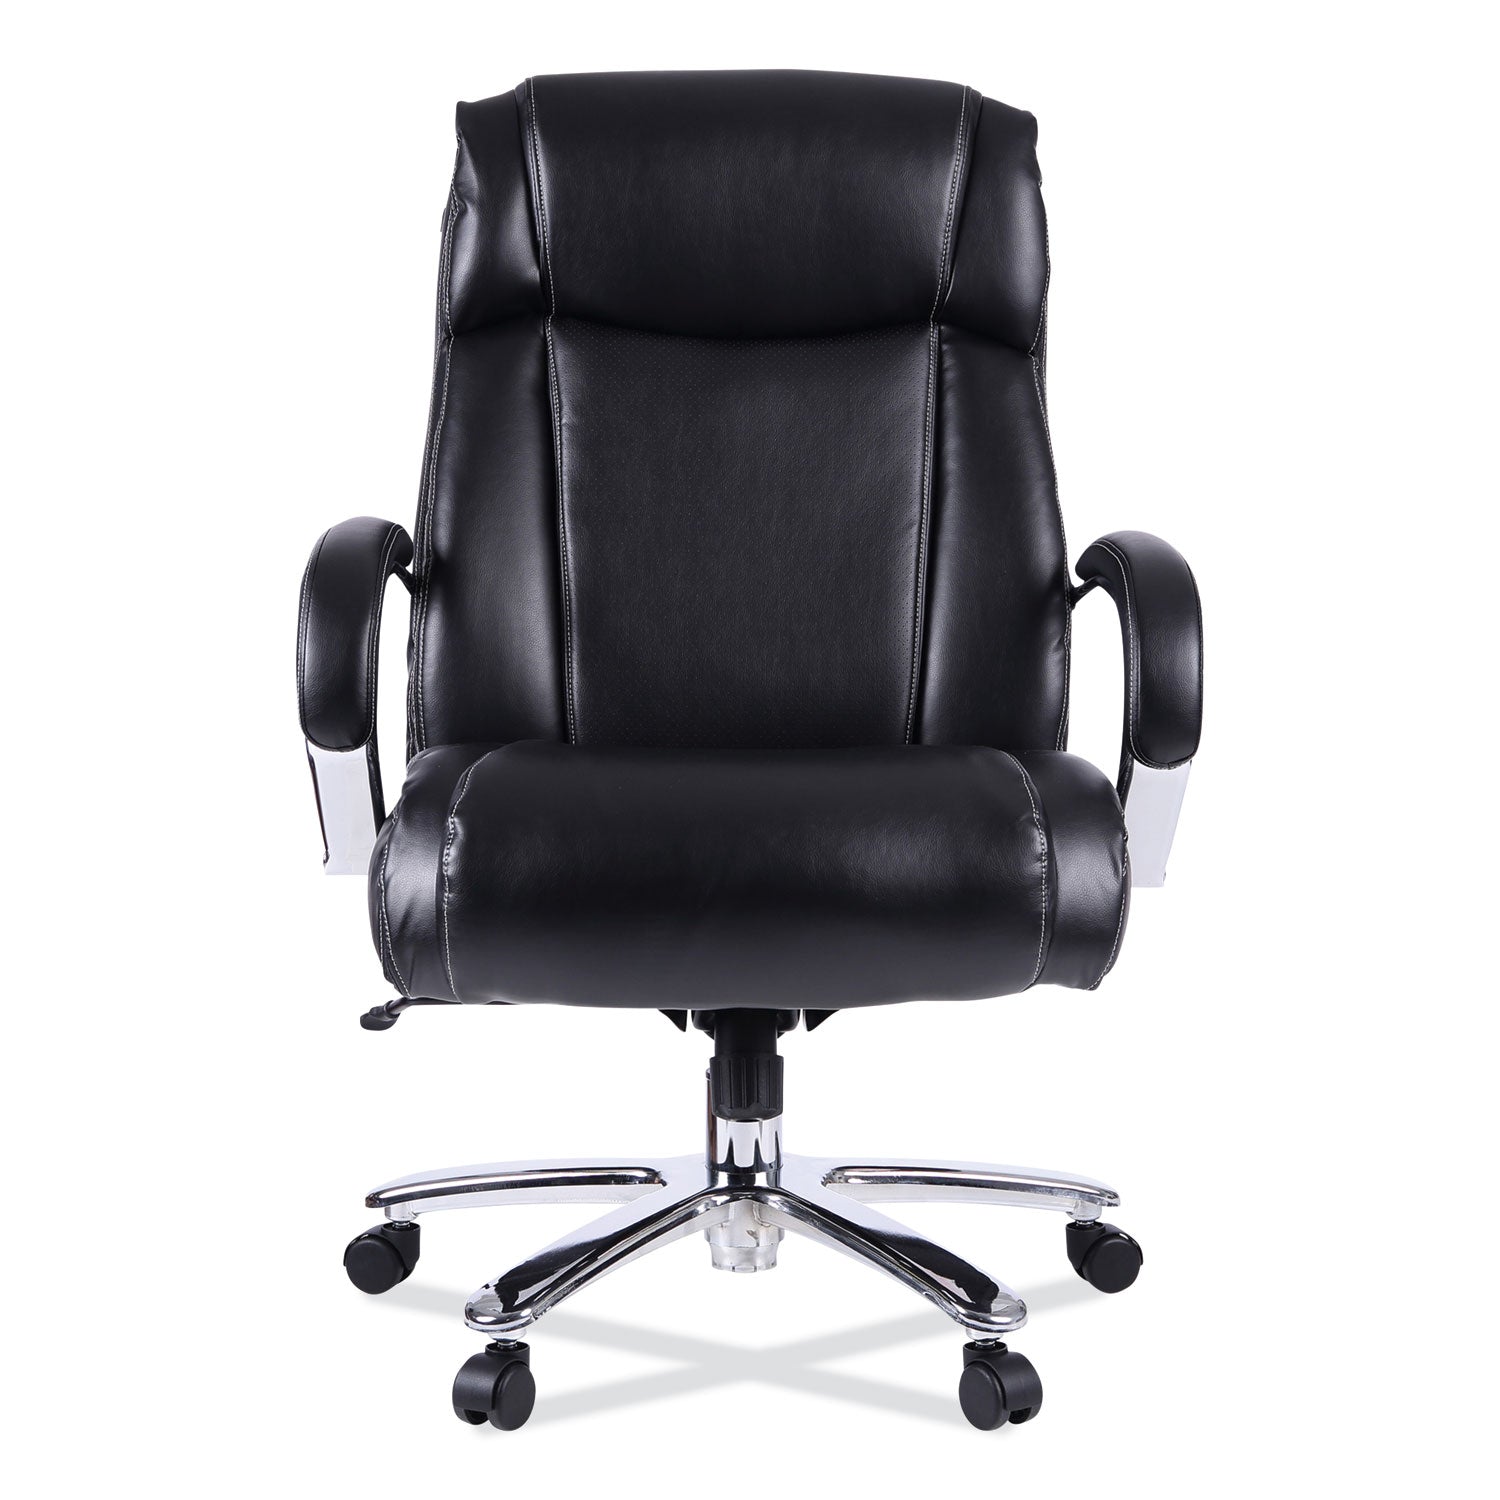 alera-maxxis-series-big-tall-bonded-leather-chair-supports-500-lb-2142-to-25-seat-height-black-seat-back-chrome-base_alems4419 - 2